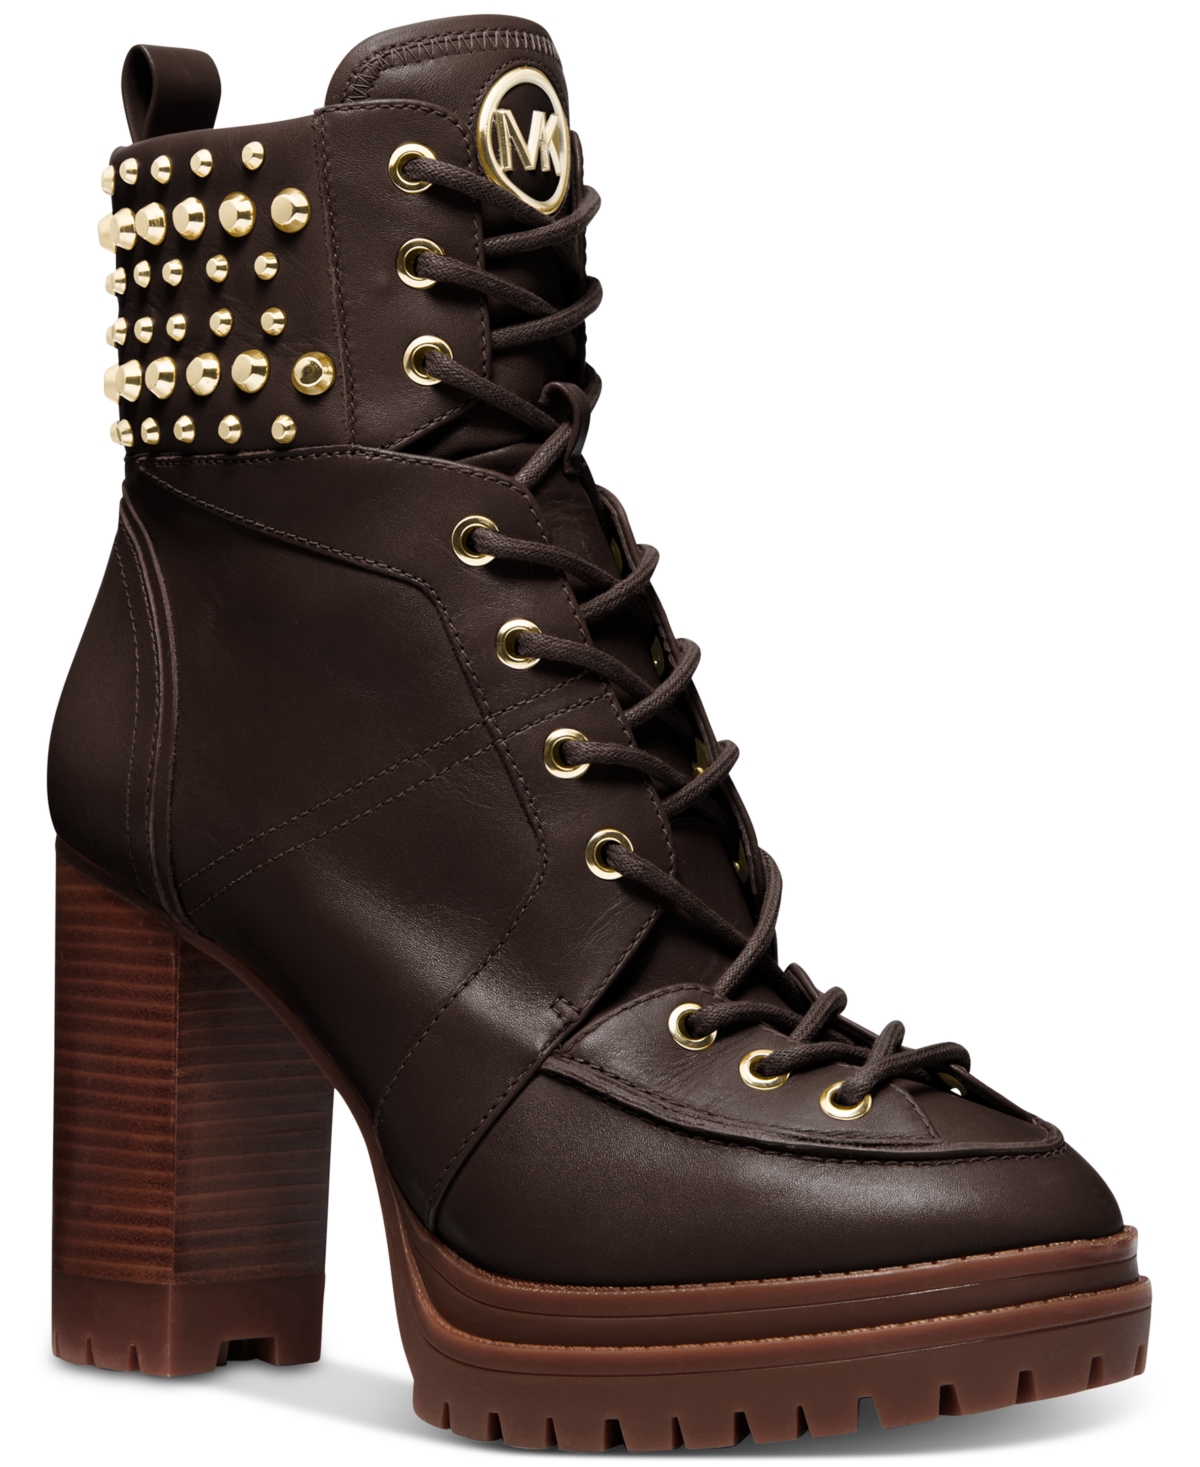 Michael Kors Women's Yvonne Studded Lace Up Platform Booties In Chocolate